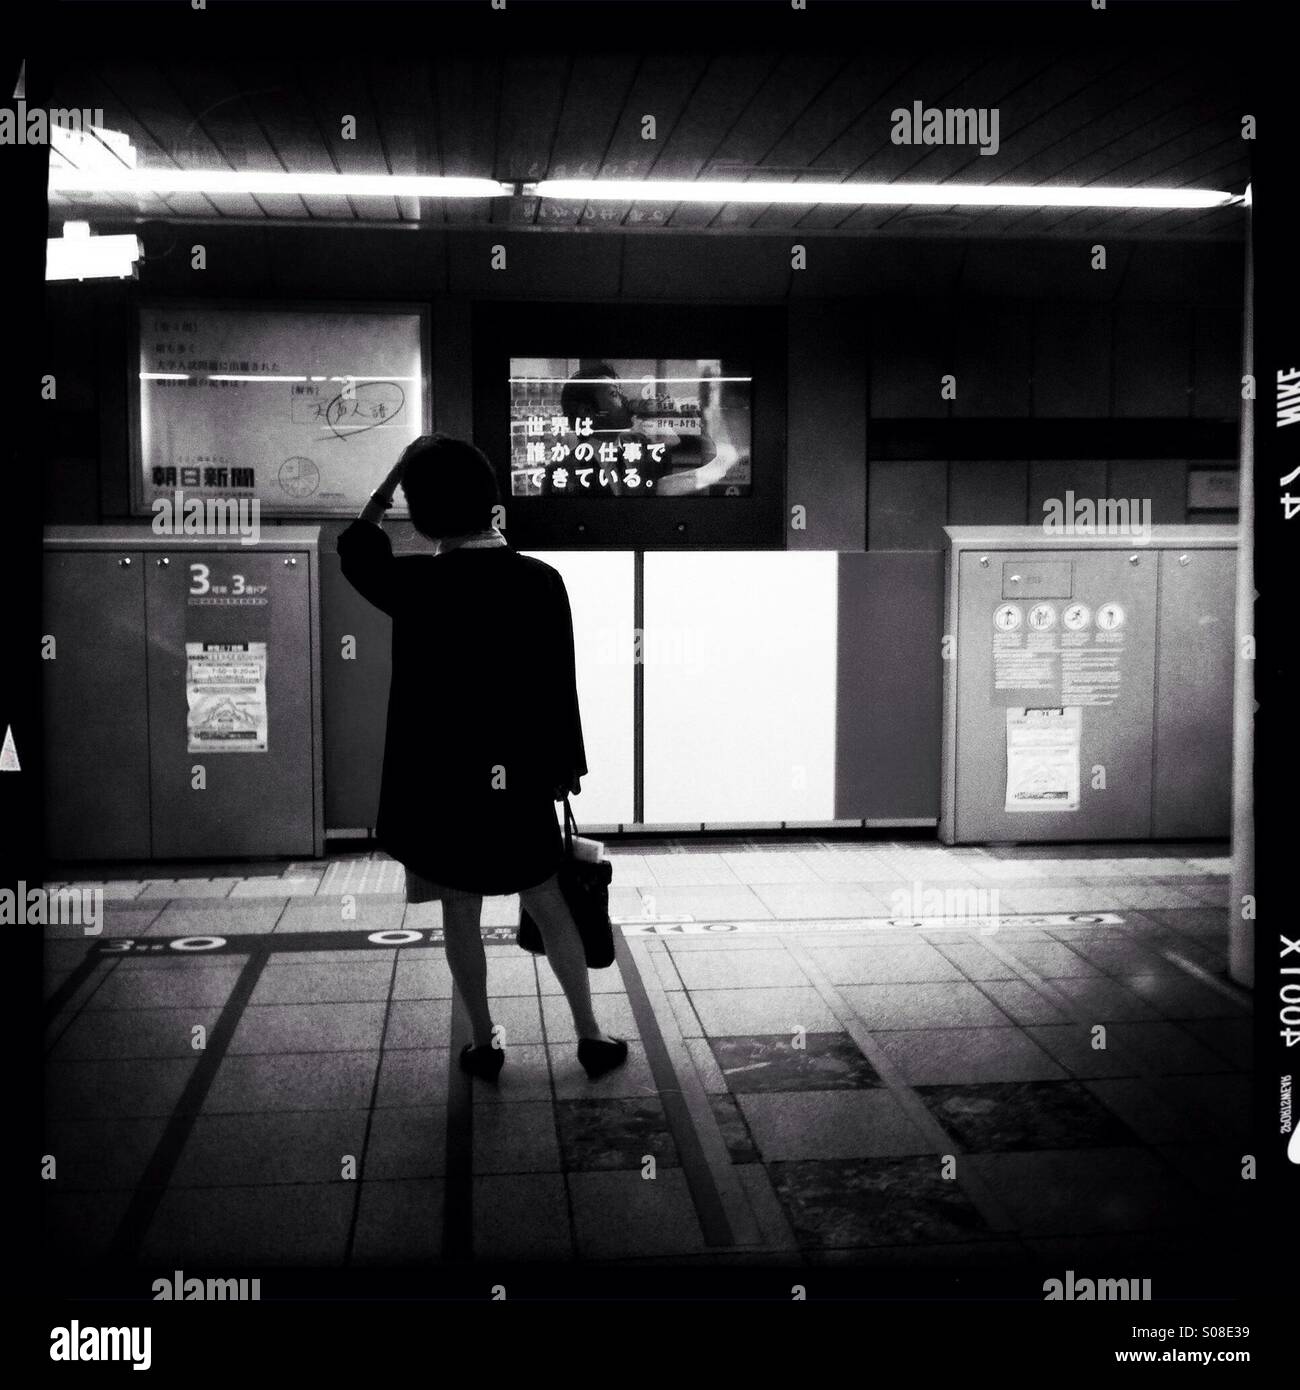 A woman waits for a train arrival at Tokyo metro in Tokyo, Japan. Stock Photo